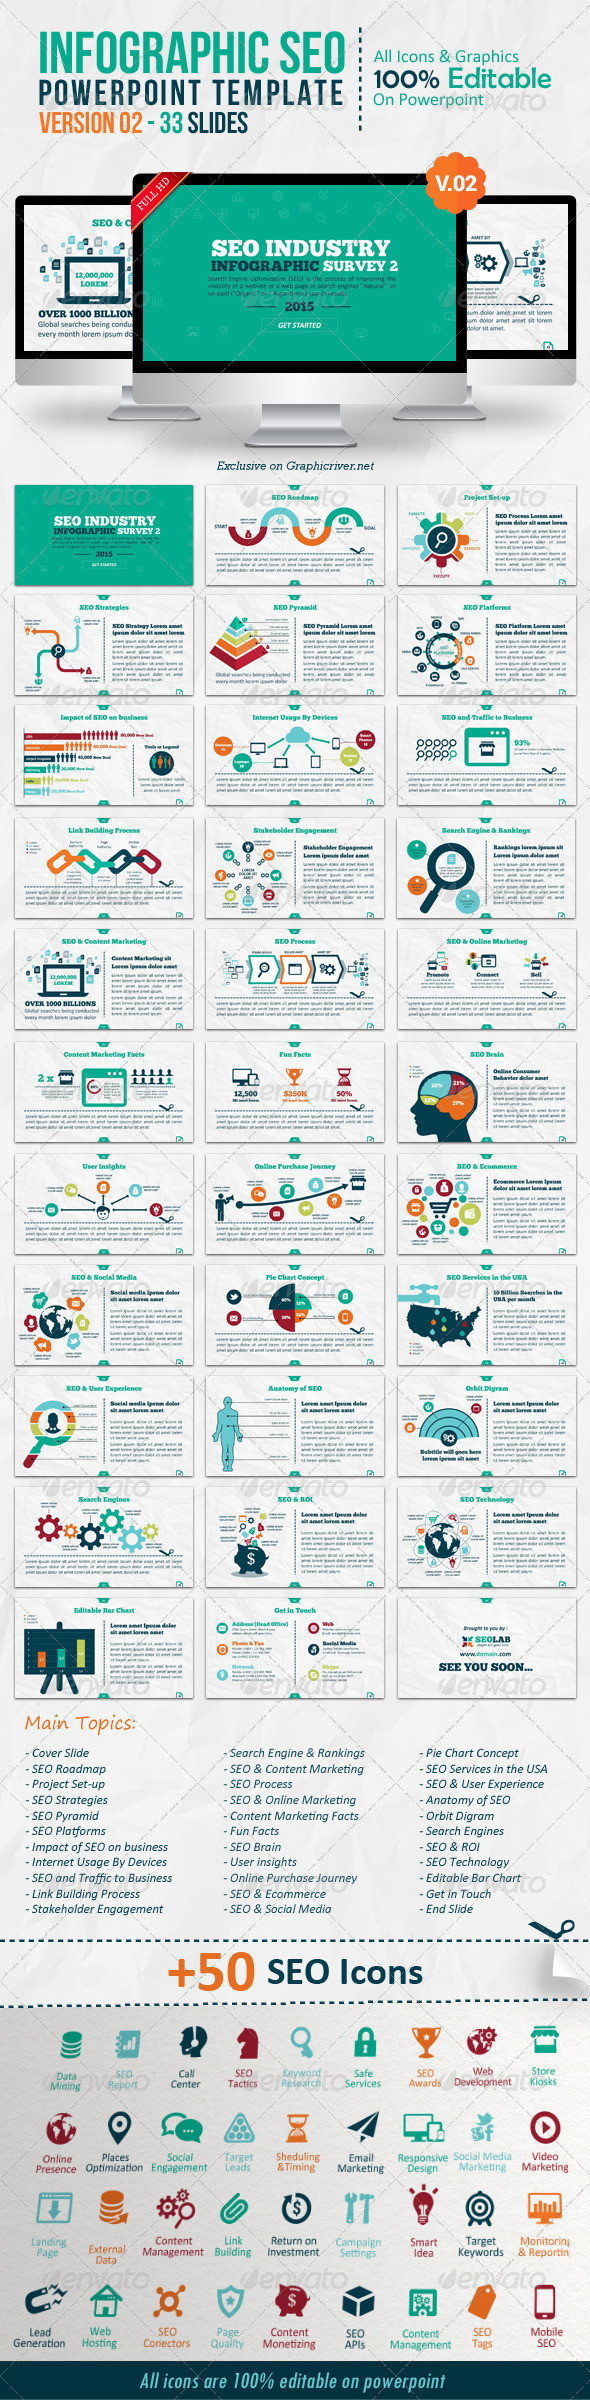 Infographic seo powerpoint version 02